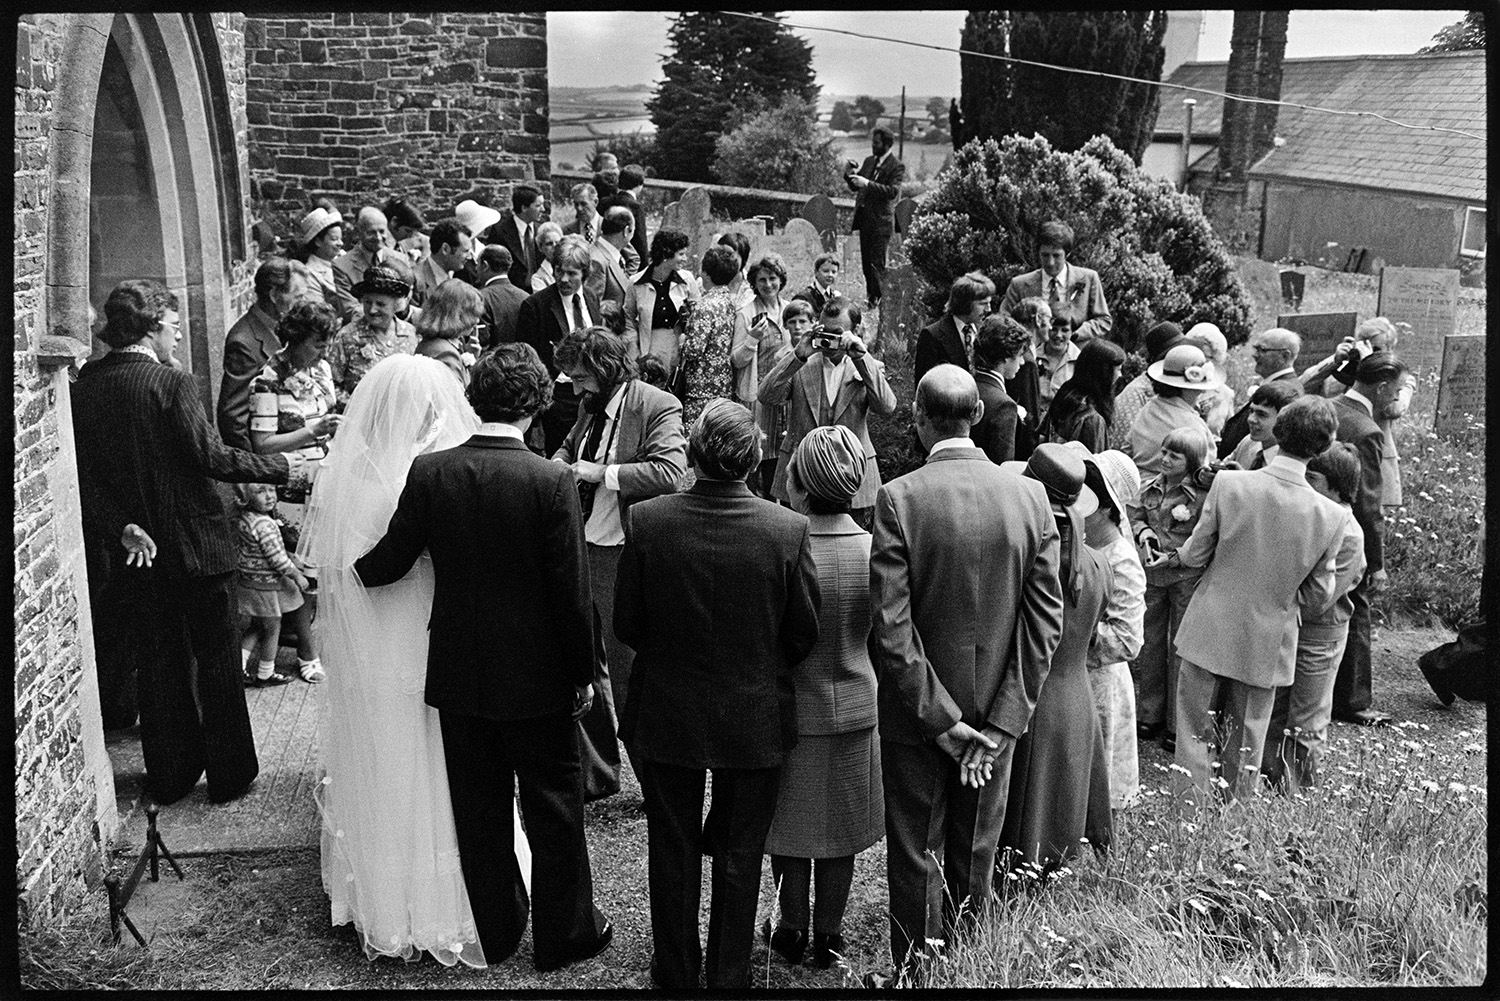 Couple and guests outside church after wedding, photographs, chatting, vicar going home. 
[Helen Siviter, her groom and the bridal party posing for photographs outside Atherington Church after their wedding. Wedding guests are gathered around taking photographs.]